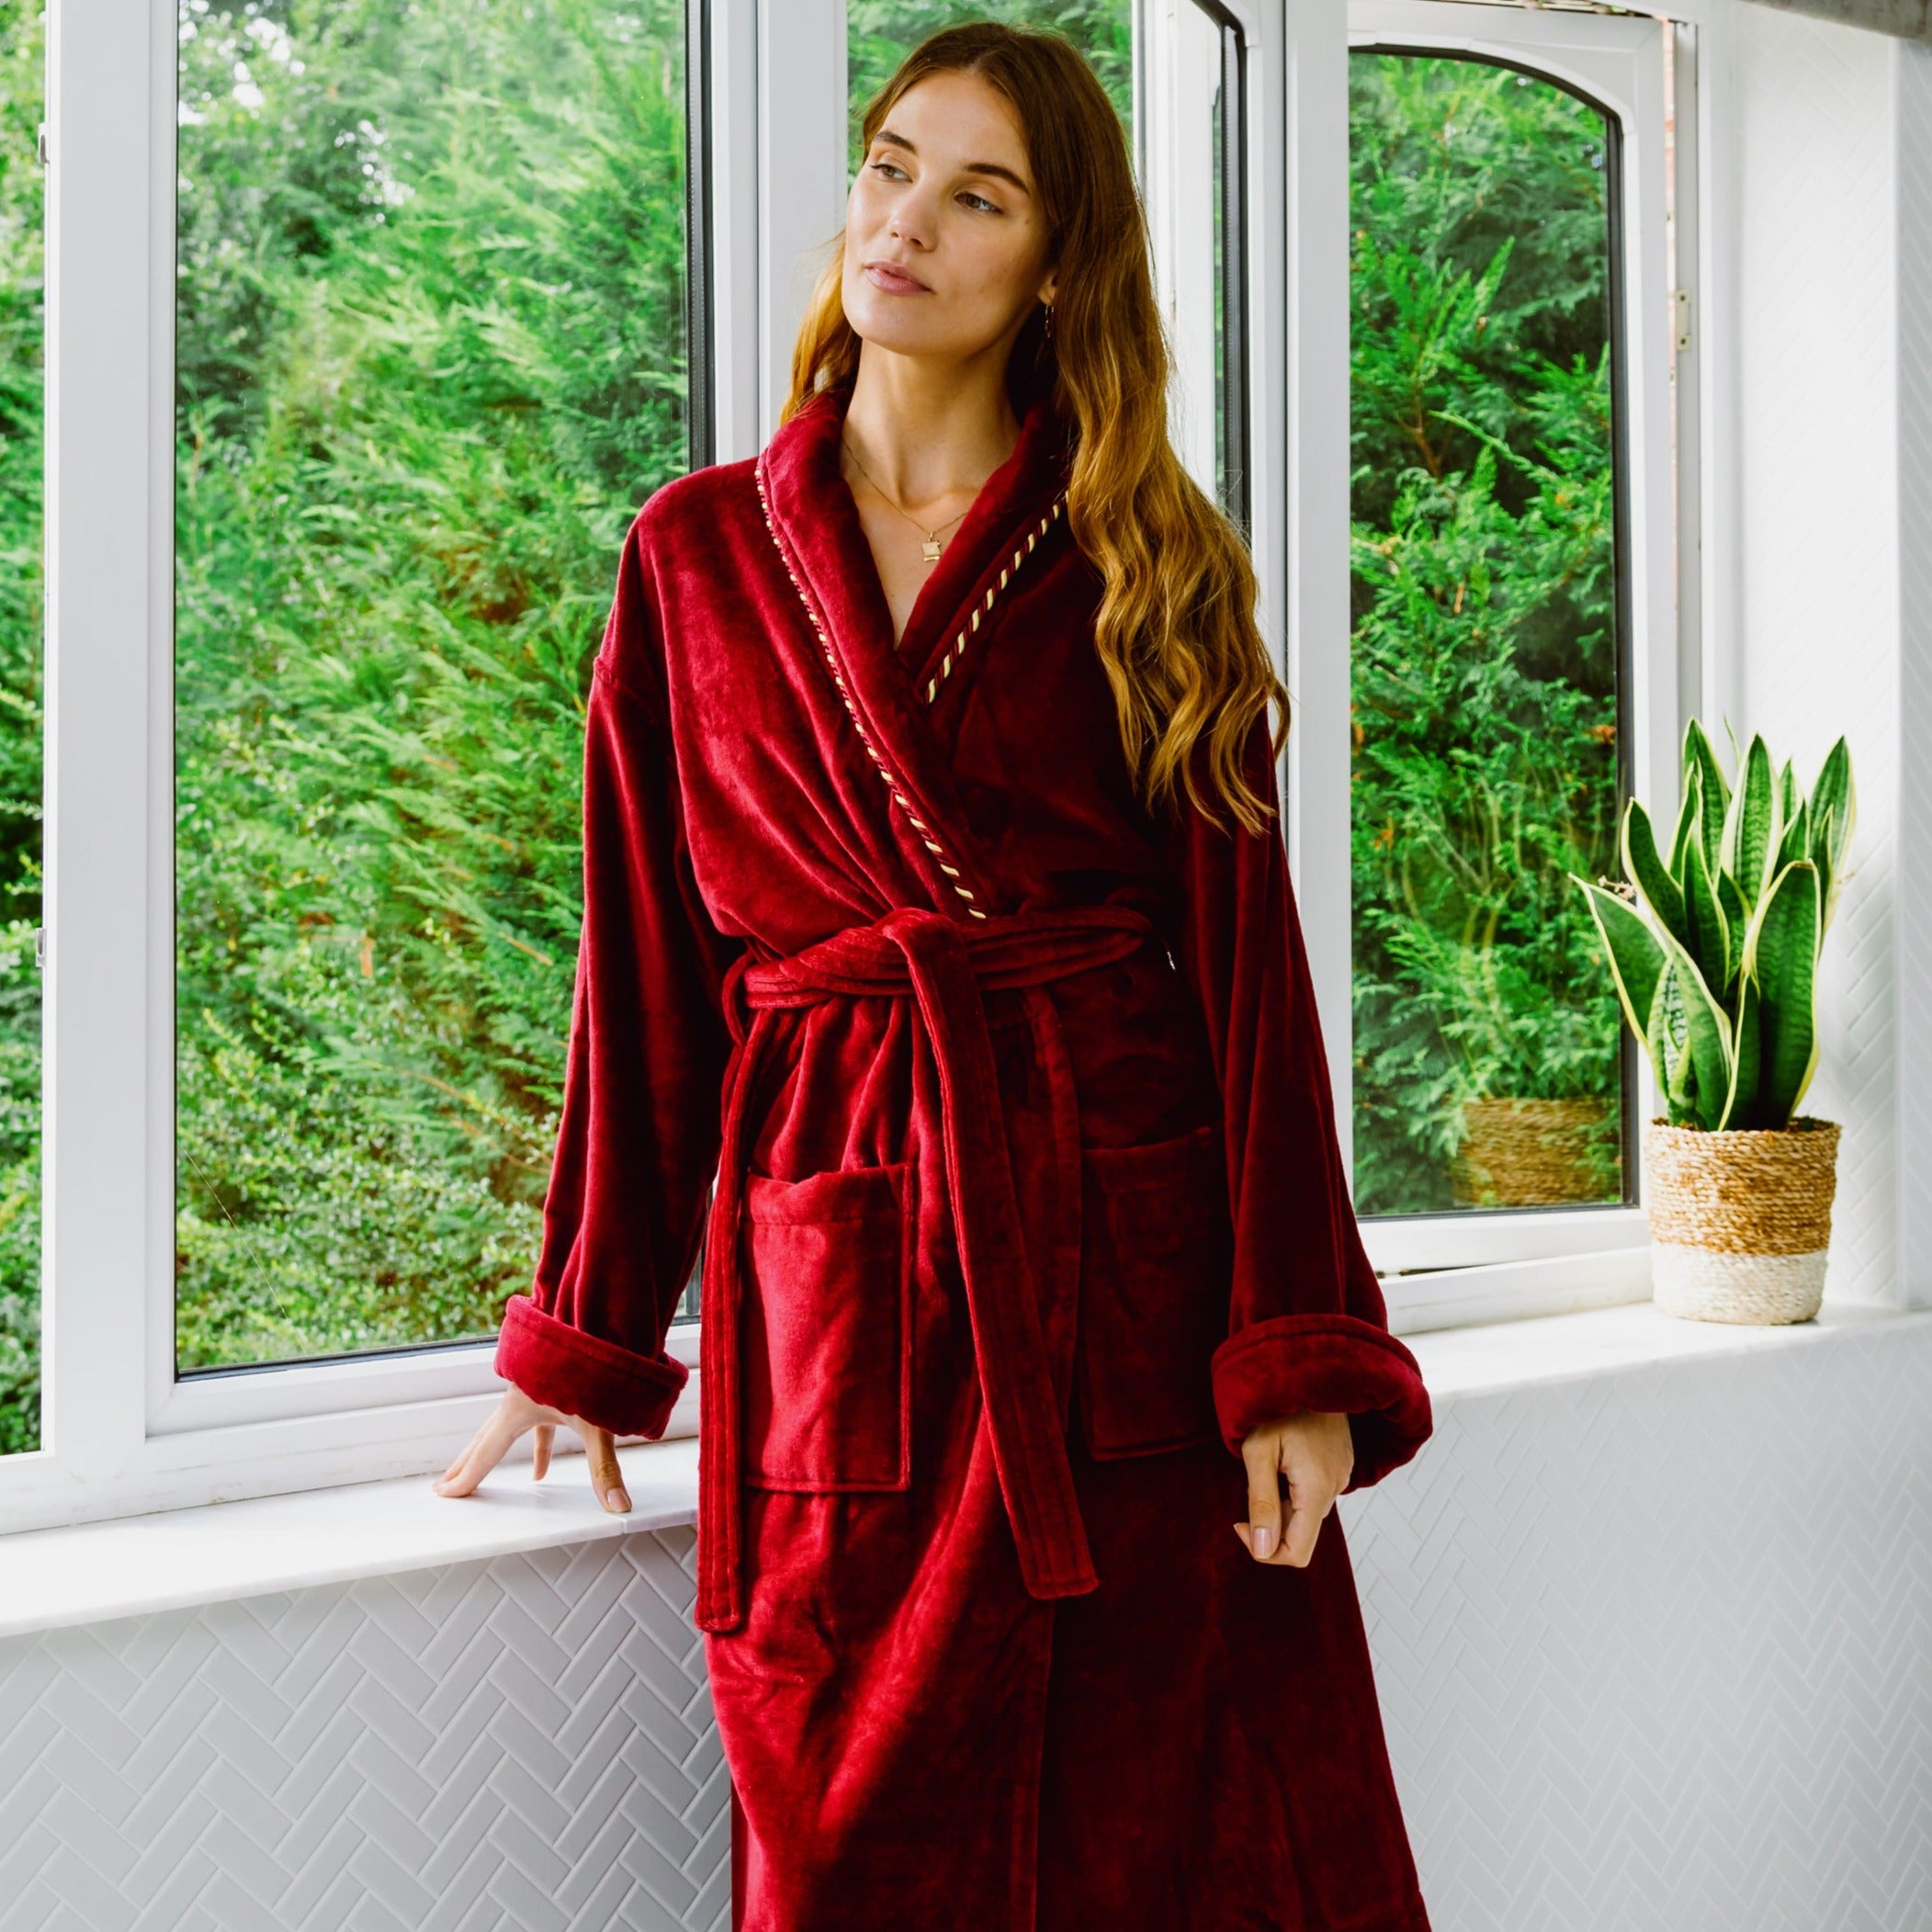 Robes - Buy Robes for Women Online By Price & Size